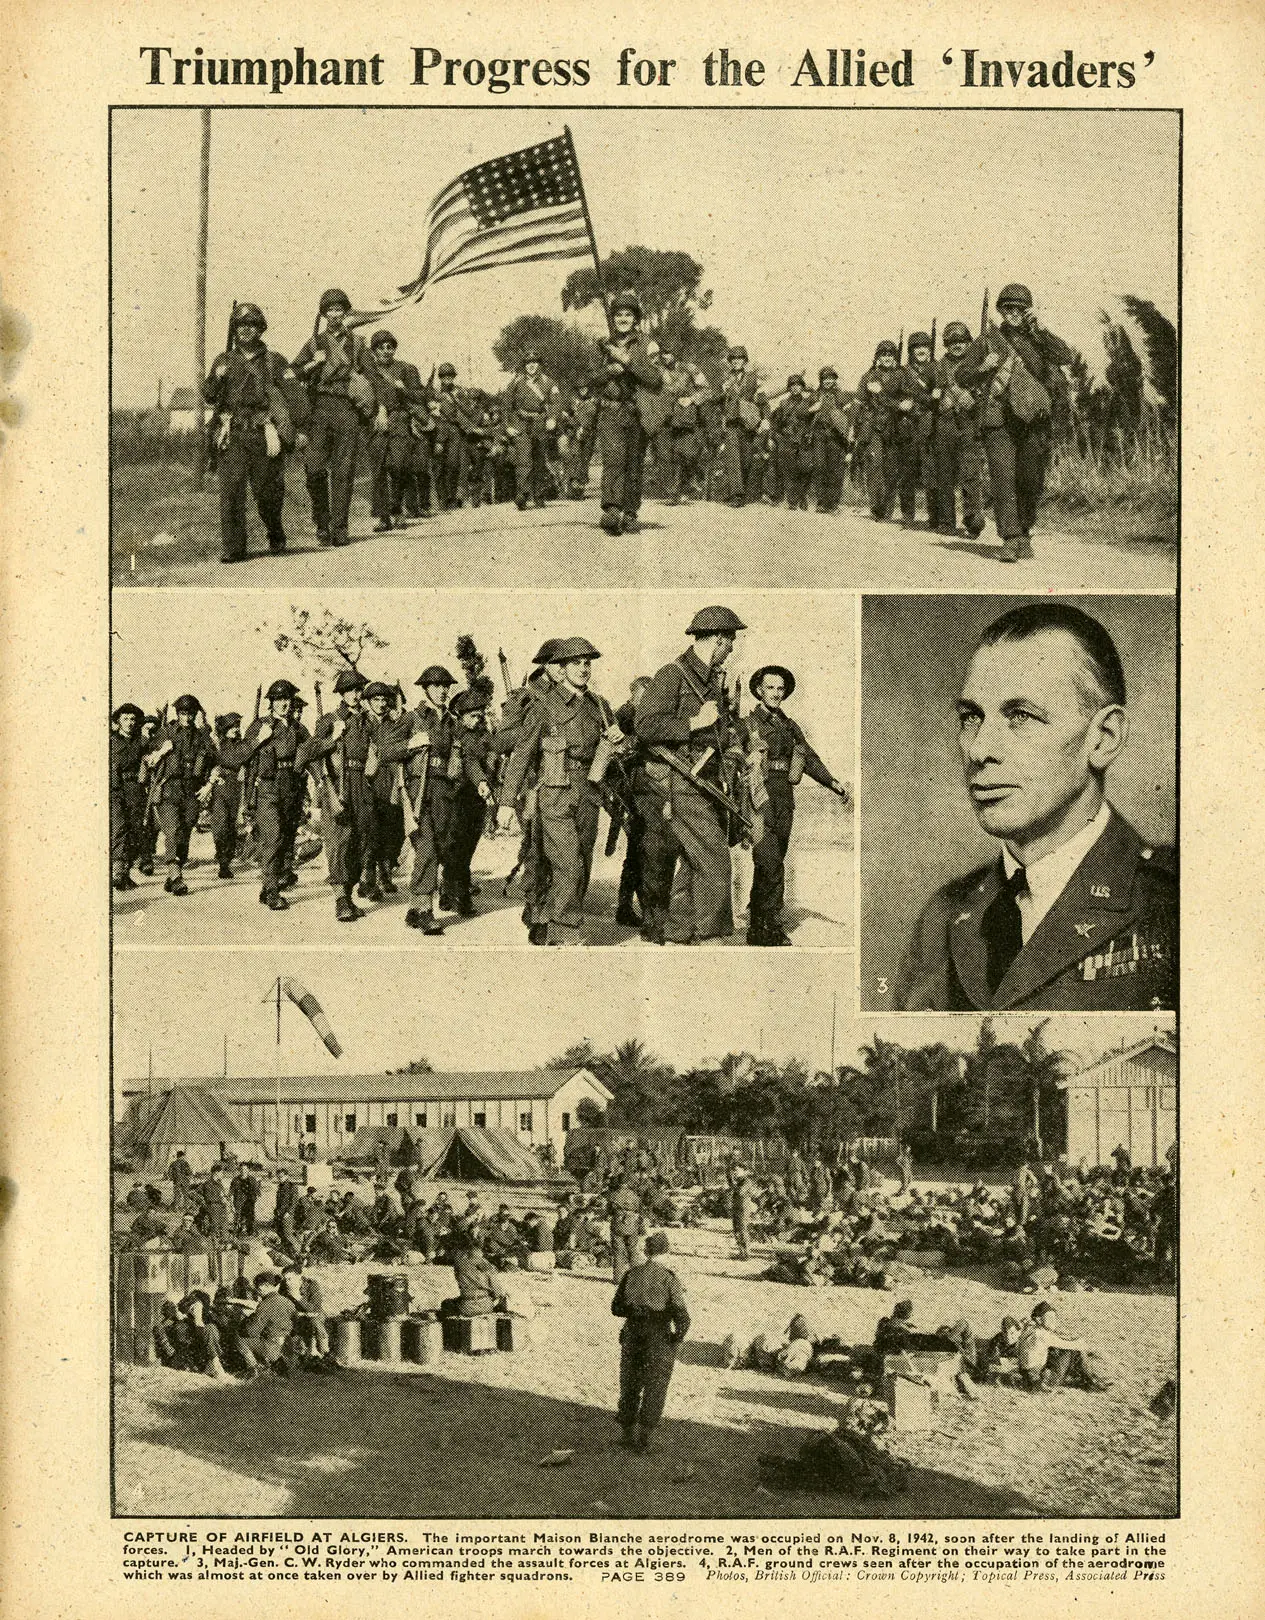 A page of The War Illustrated showing several photos of American and British soldiers in North Africa. The top picture shows Americans marching forward with a large US flag held high by a soldier in the front and center. The center photos show an American general and a number of British soldiers walking. The bottom photo shows a busy scene of British soldiers at camp in a captured facility in North Africa.